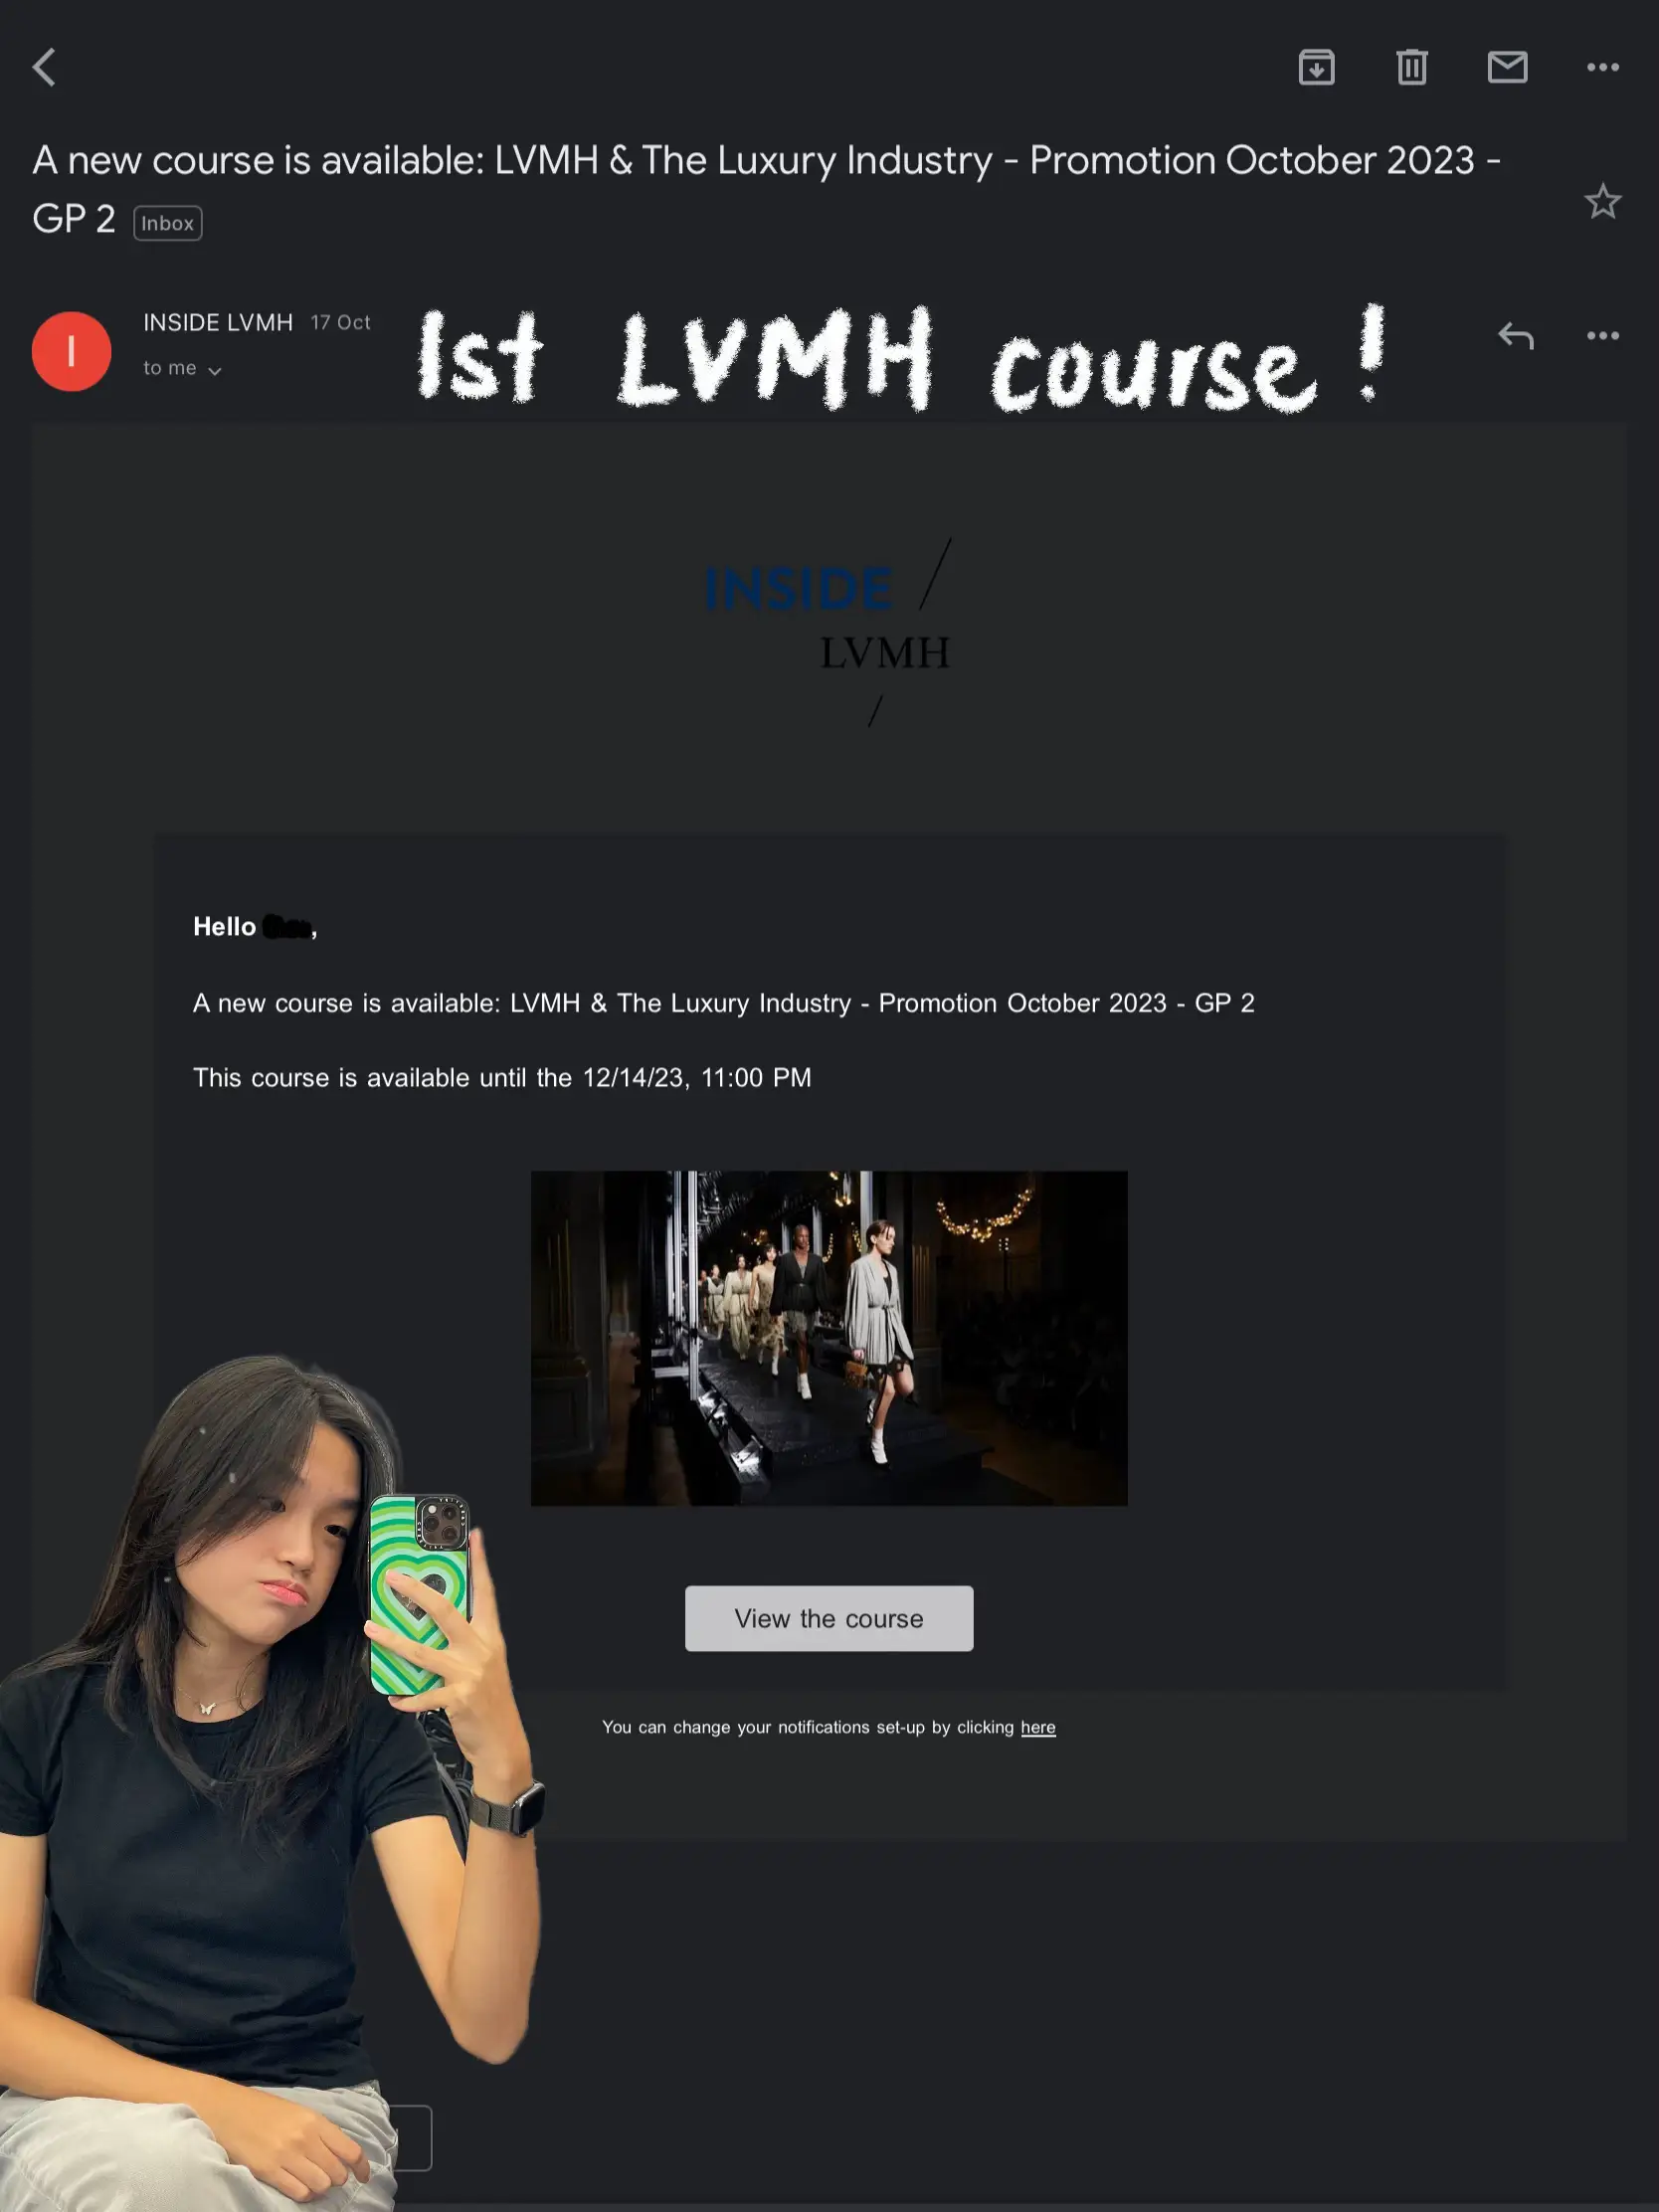 Free LVMH Course? A chance to work in LV?, Gallery posted by vick